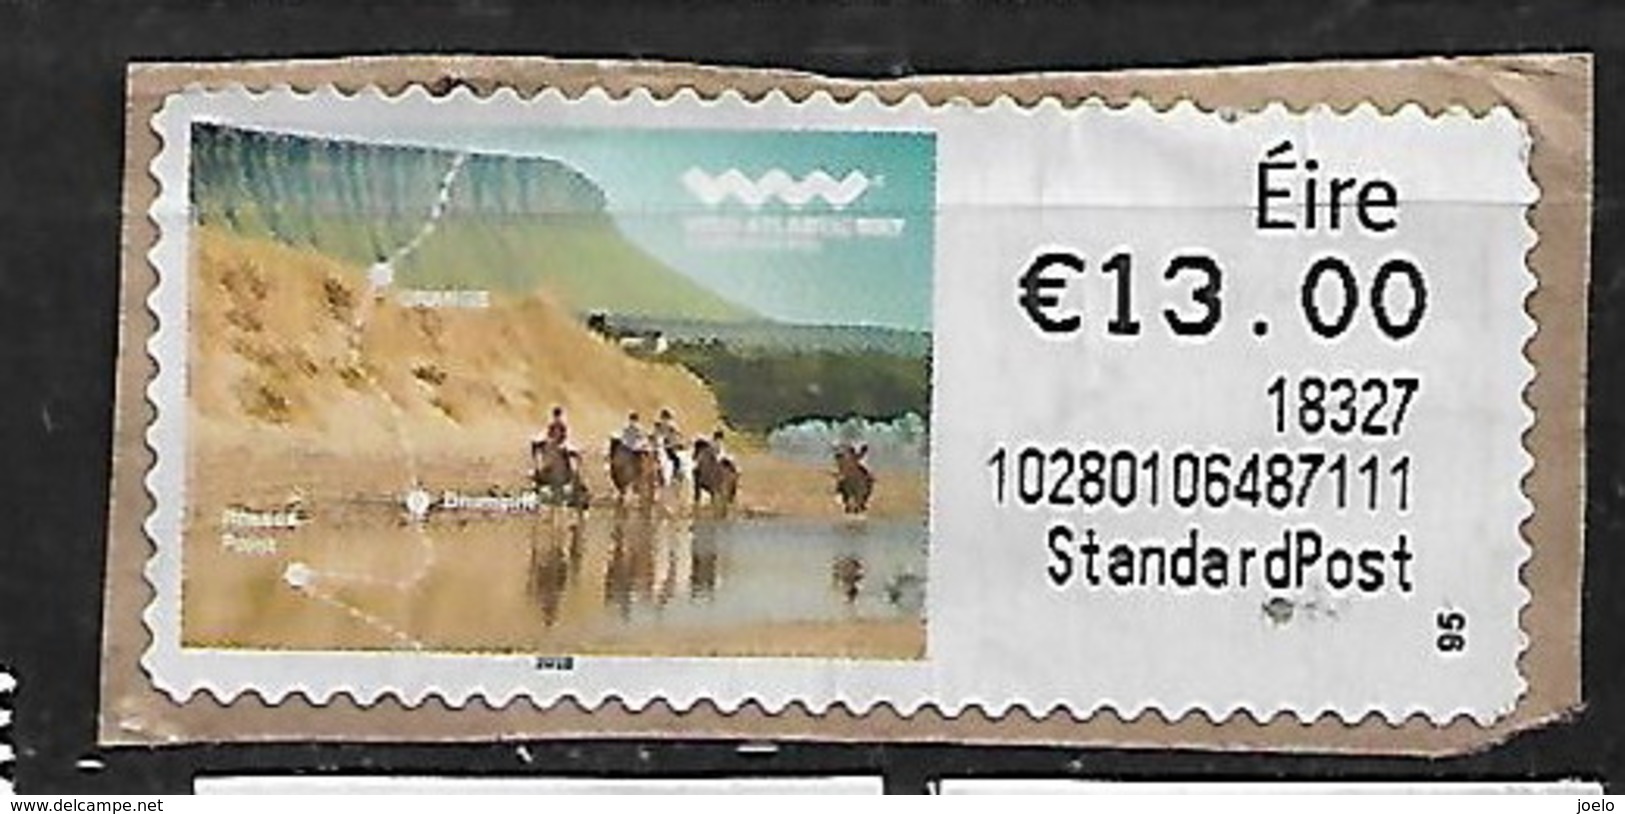 IRELAND 2018 POST-AND- GO HORSE TREKKING !3 EUR SA - Franking Labels